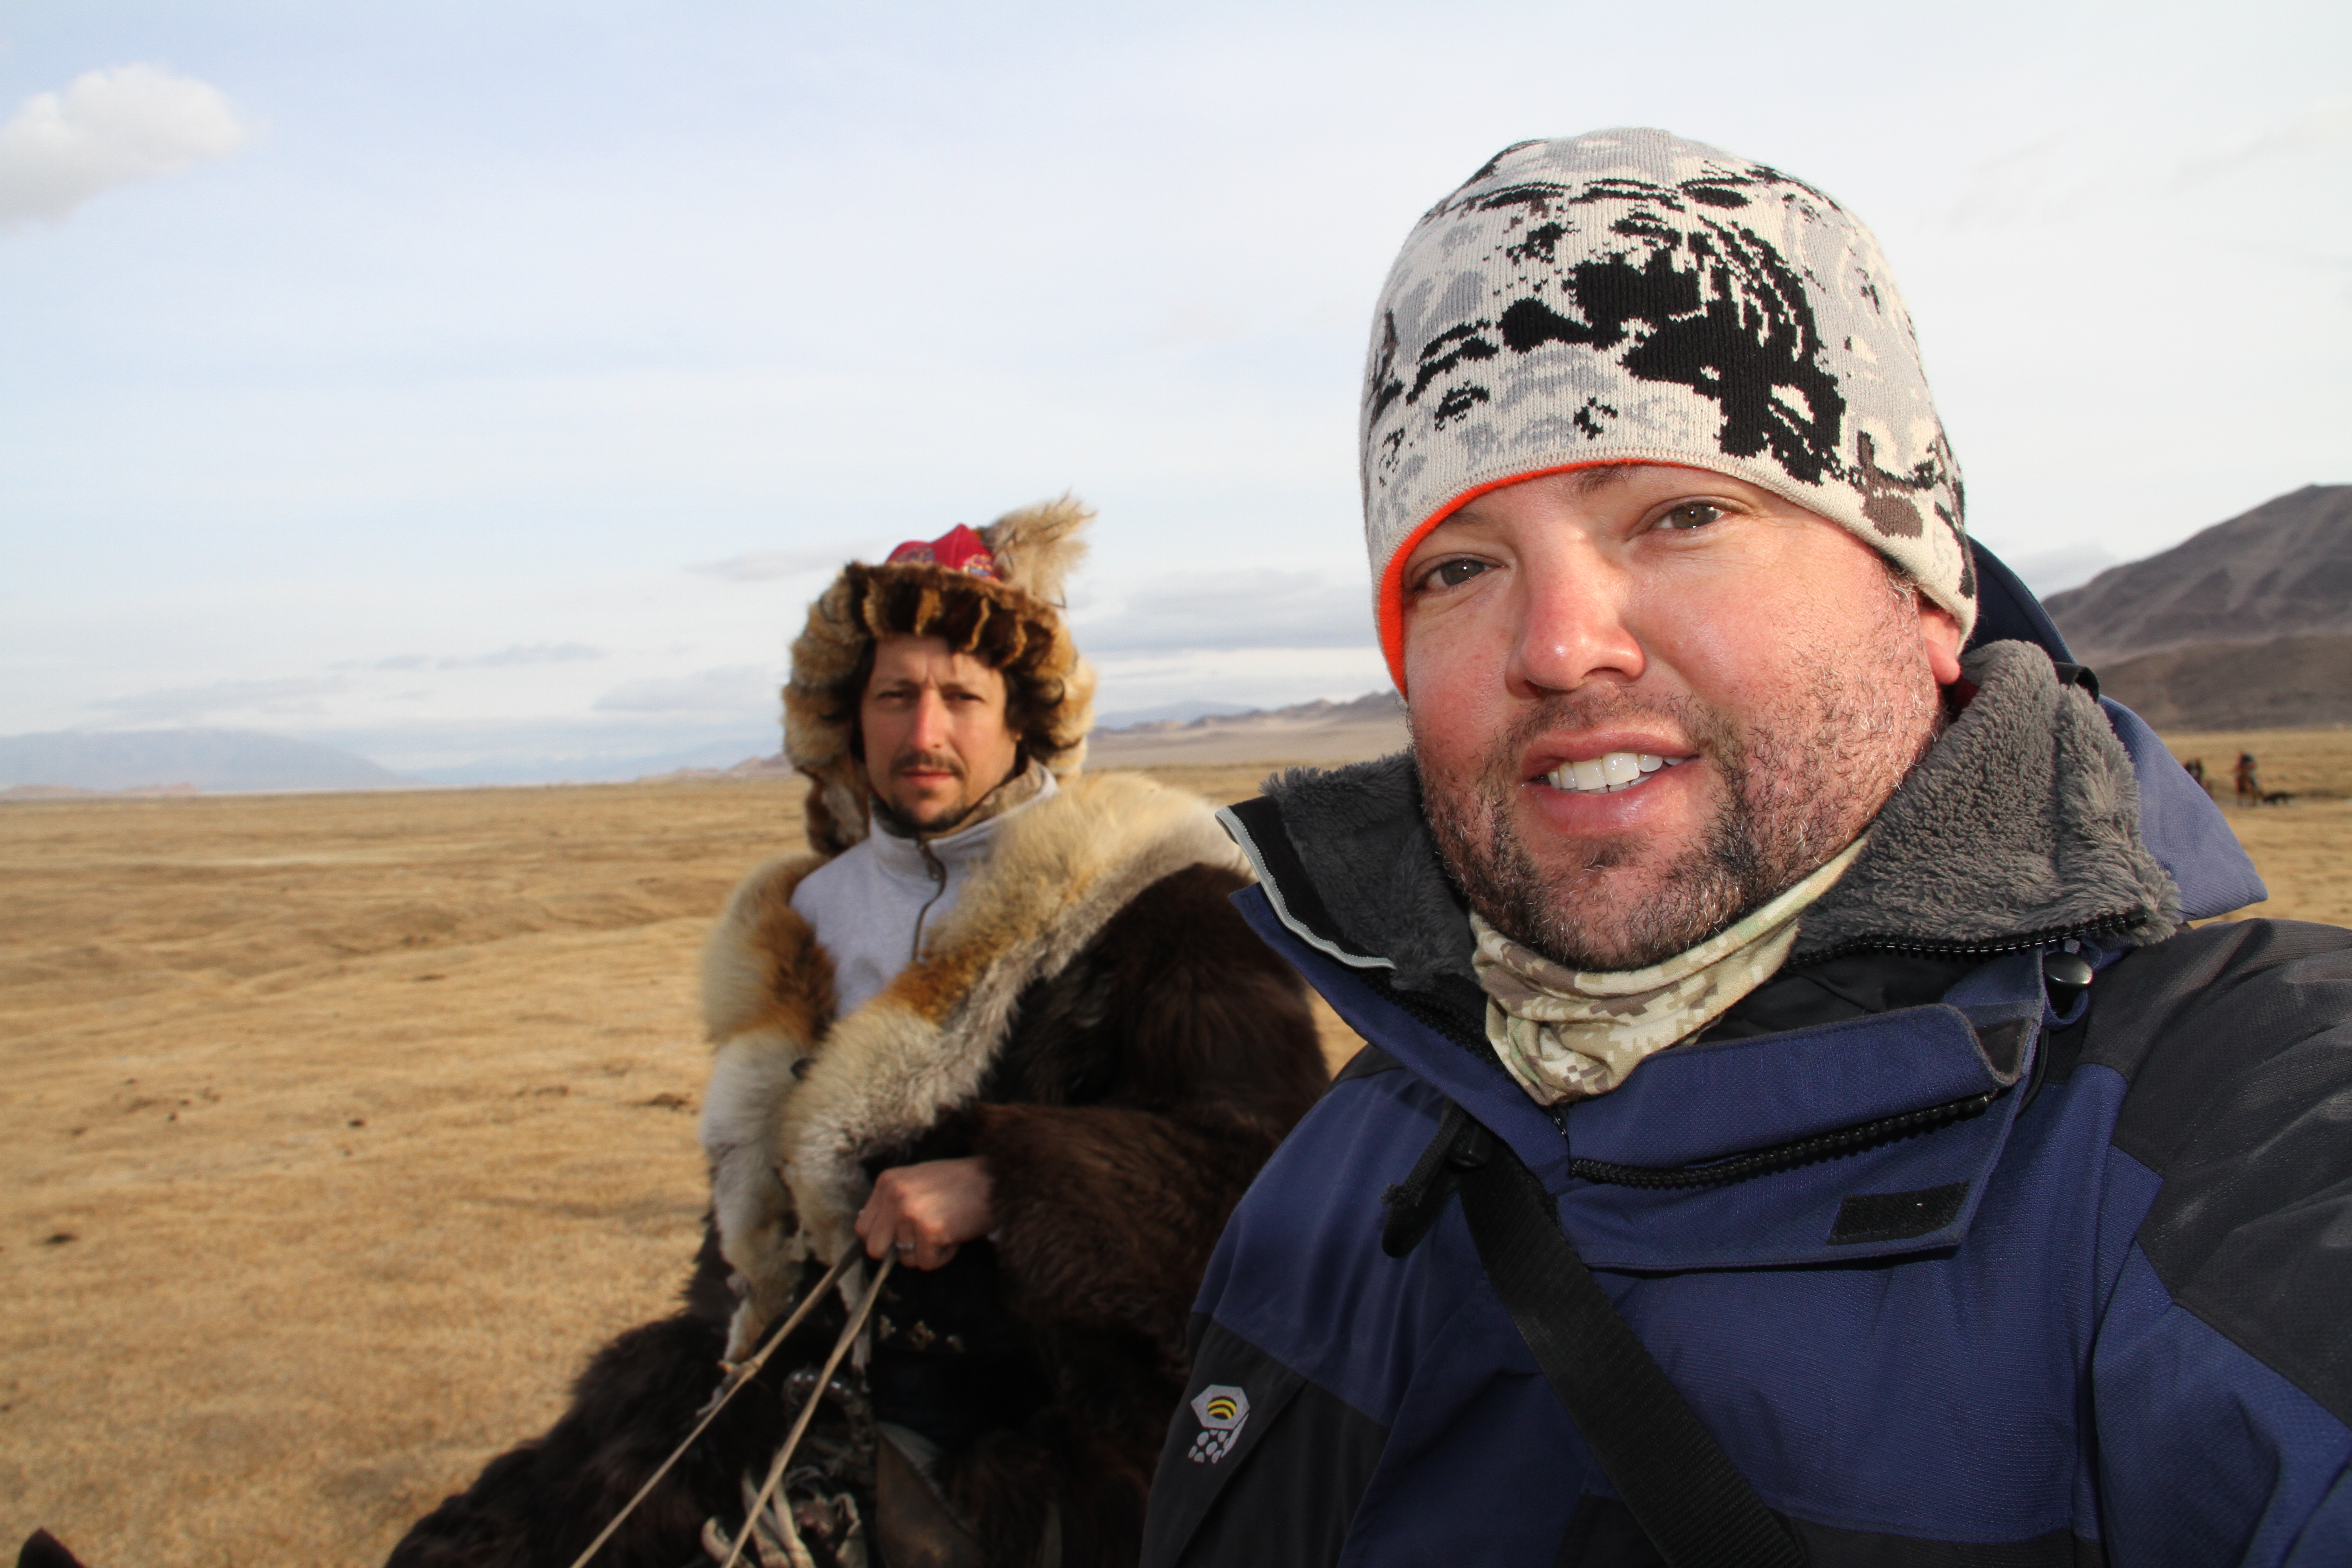 Director of photograhy, Fernando Del Rio and Eddie Brochin heading to the summit for an eagle hunt